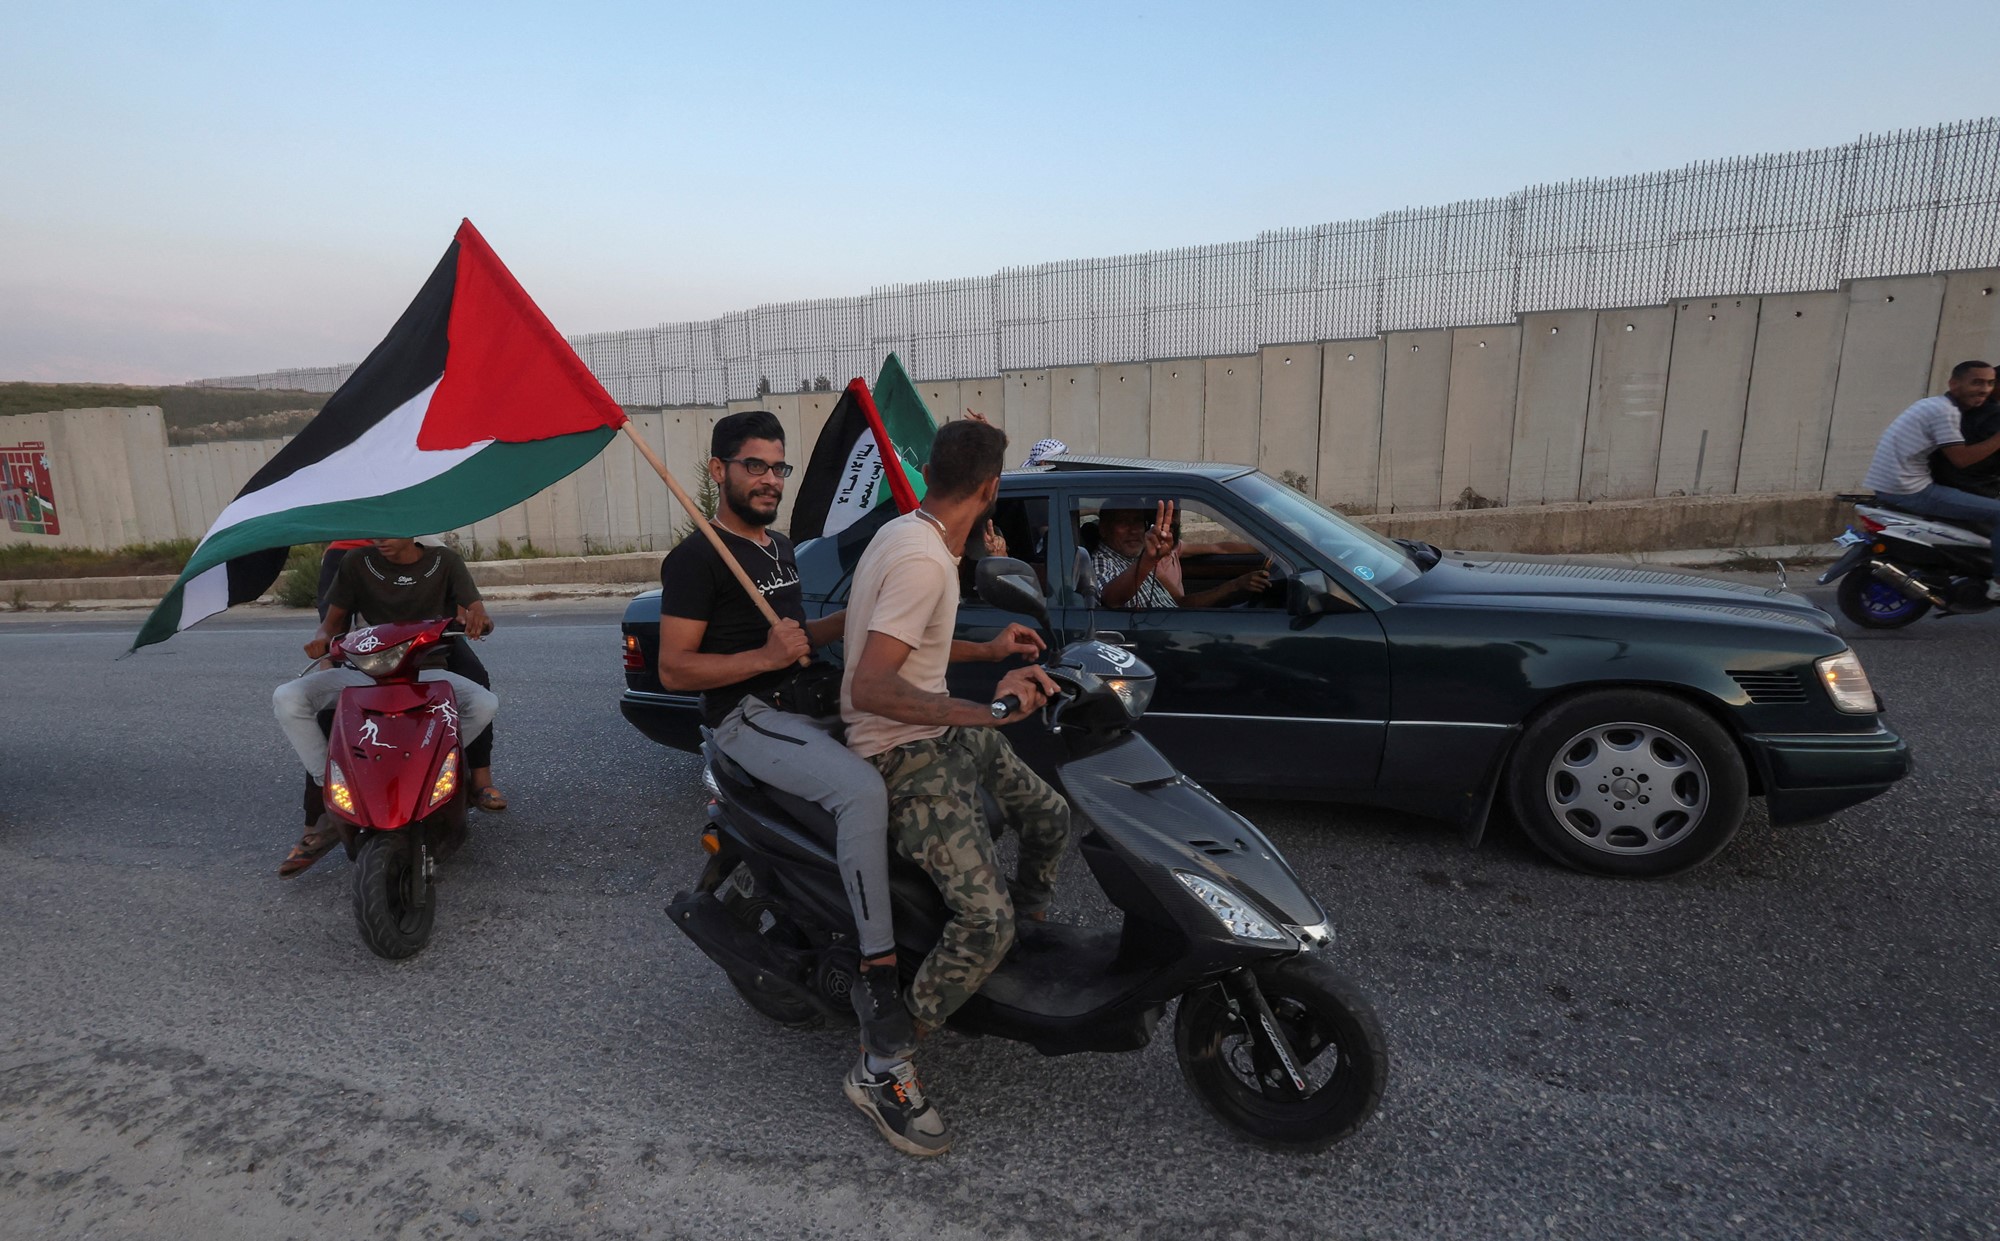 Two men on a motorbike, with one holding a flag, speak to men in a car.